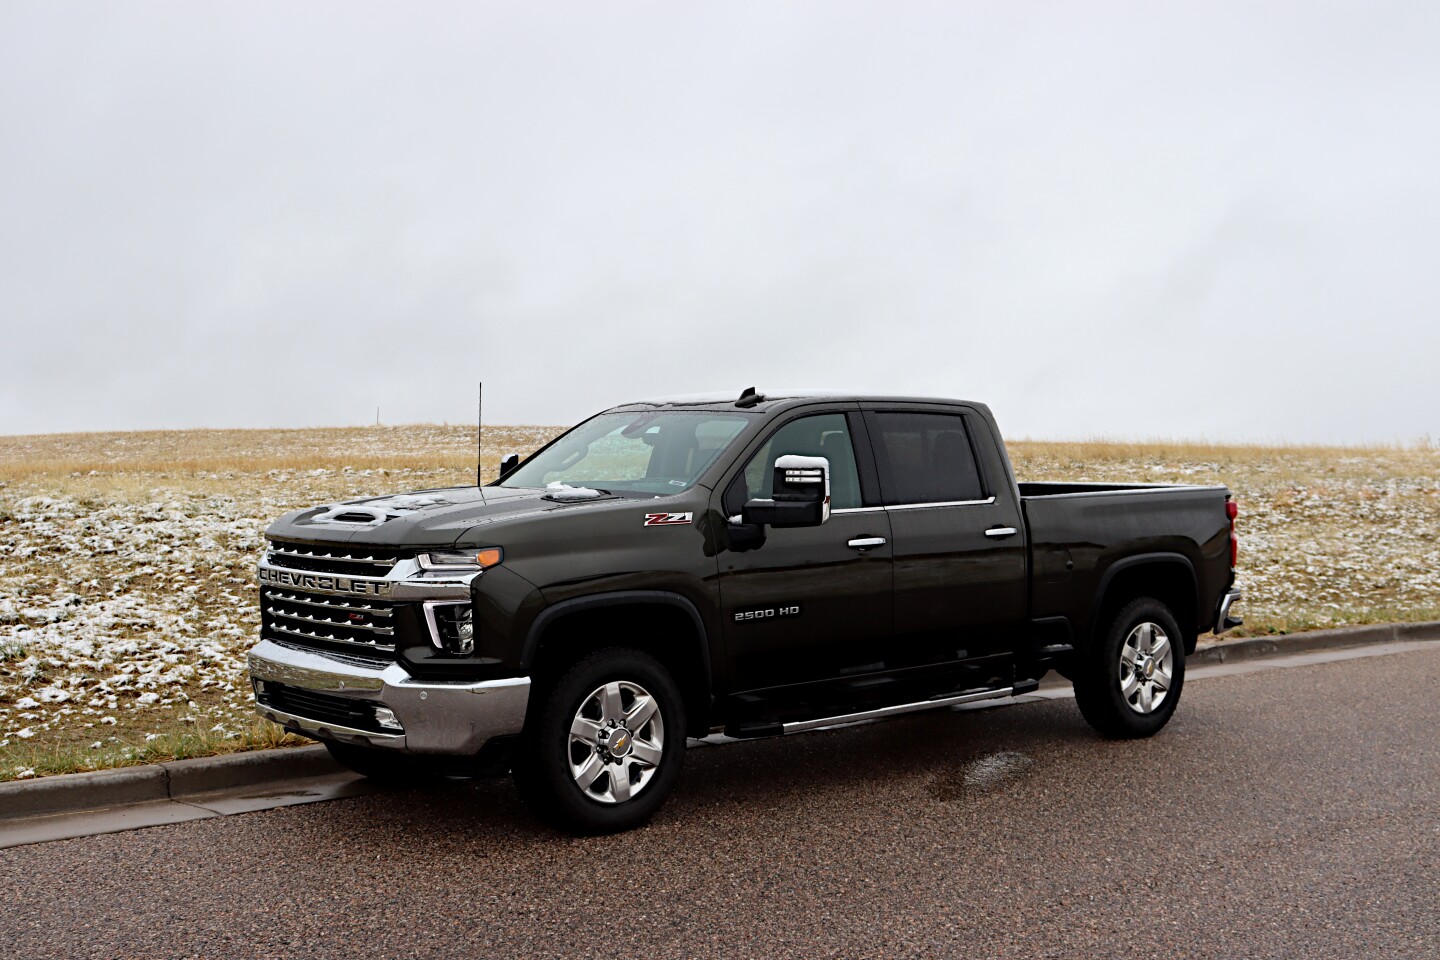 Capable of towing up to 18,500 lb, this heavy-duty truck from Chevrolet also drives smoothly